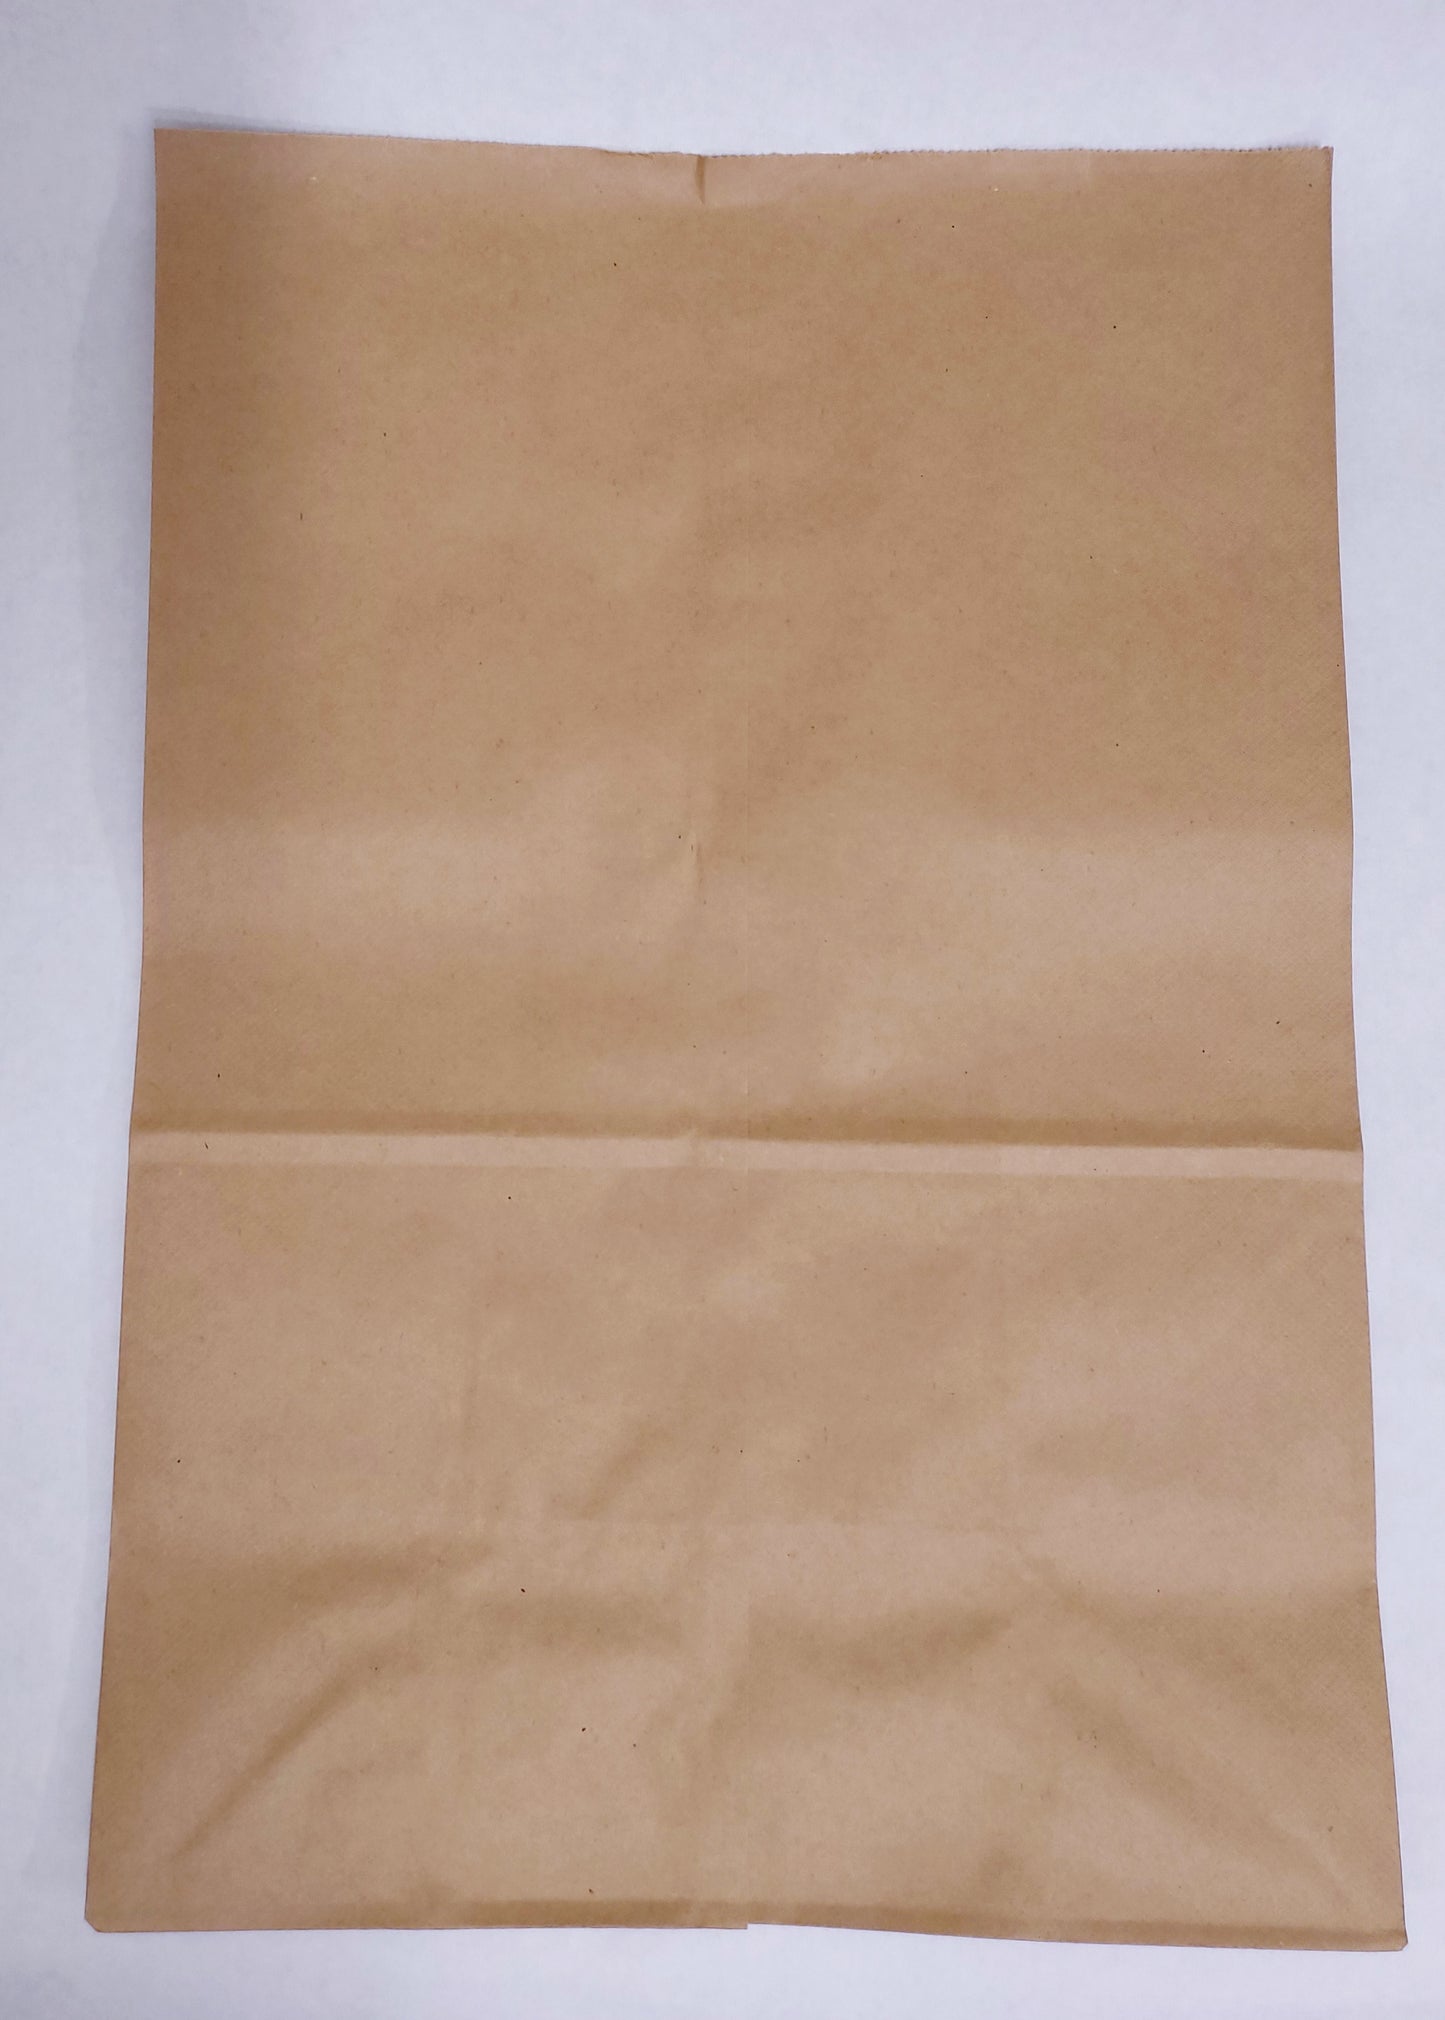 Paper Evidence Bags